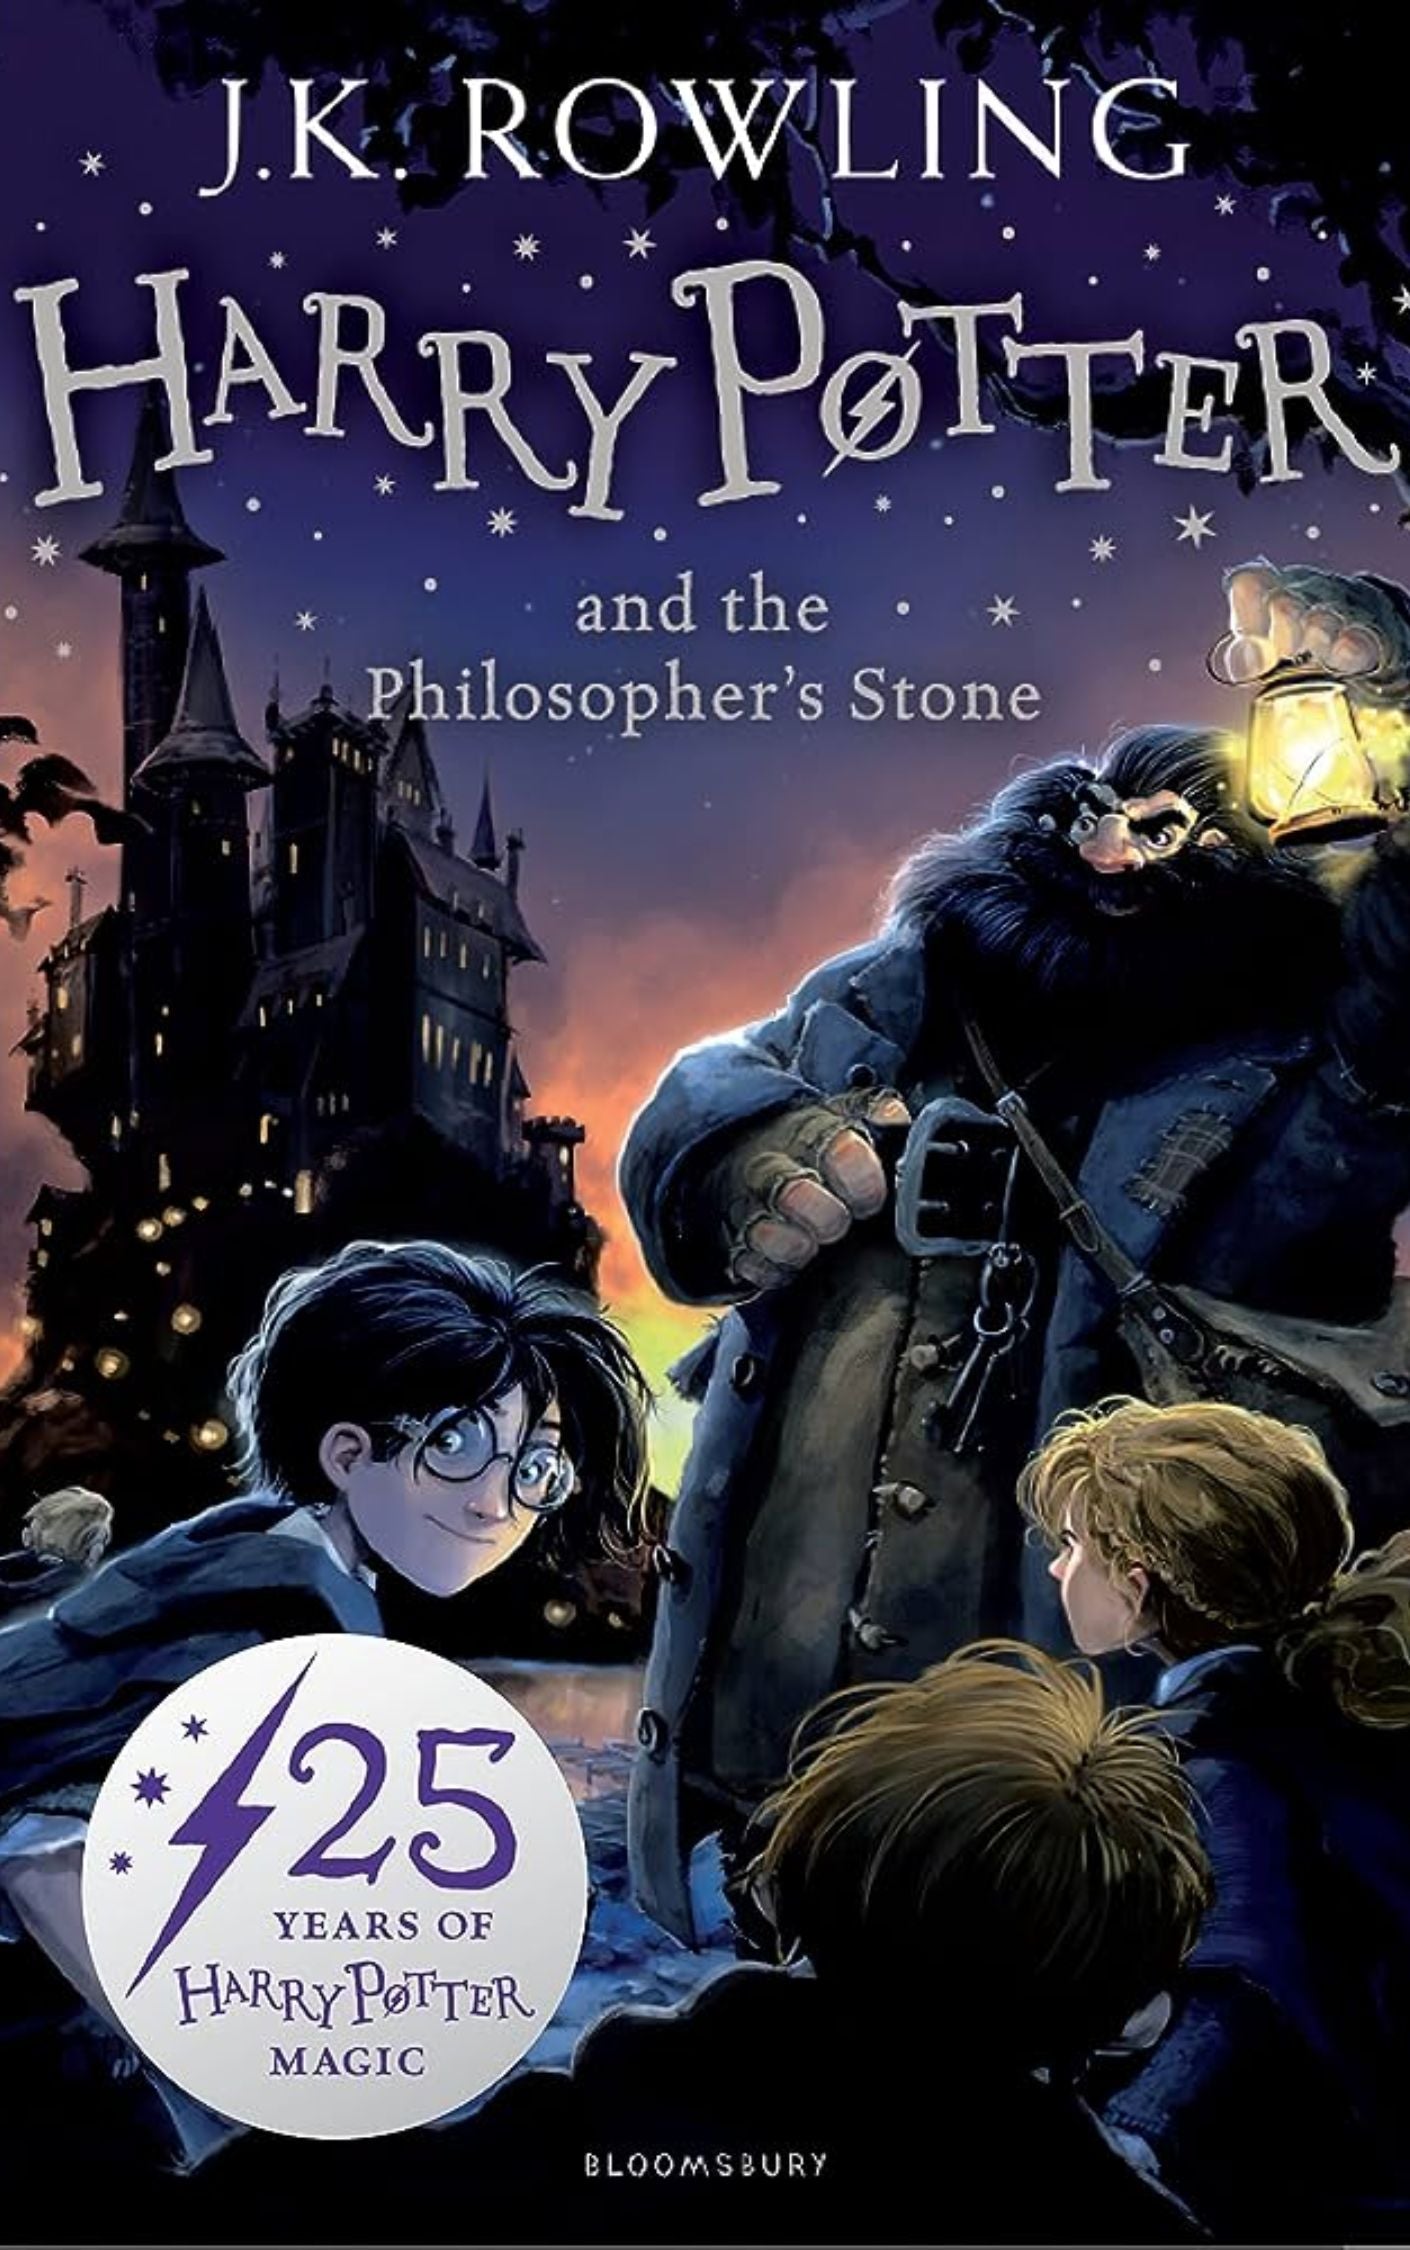 "Harry Potter and the Sorcerer's Stone" by J.K. Rowling: Books For Women